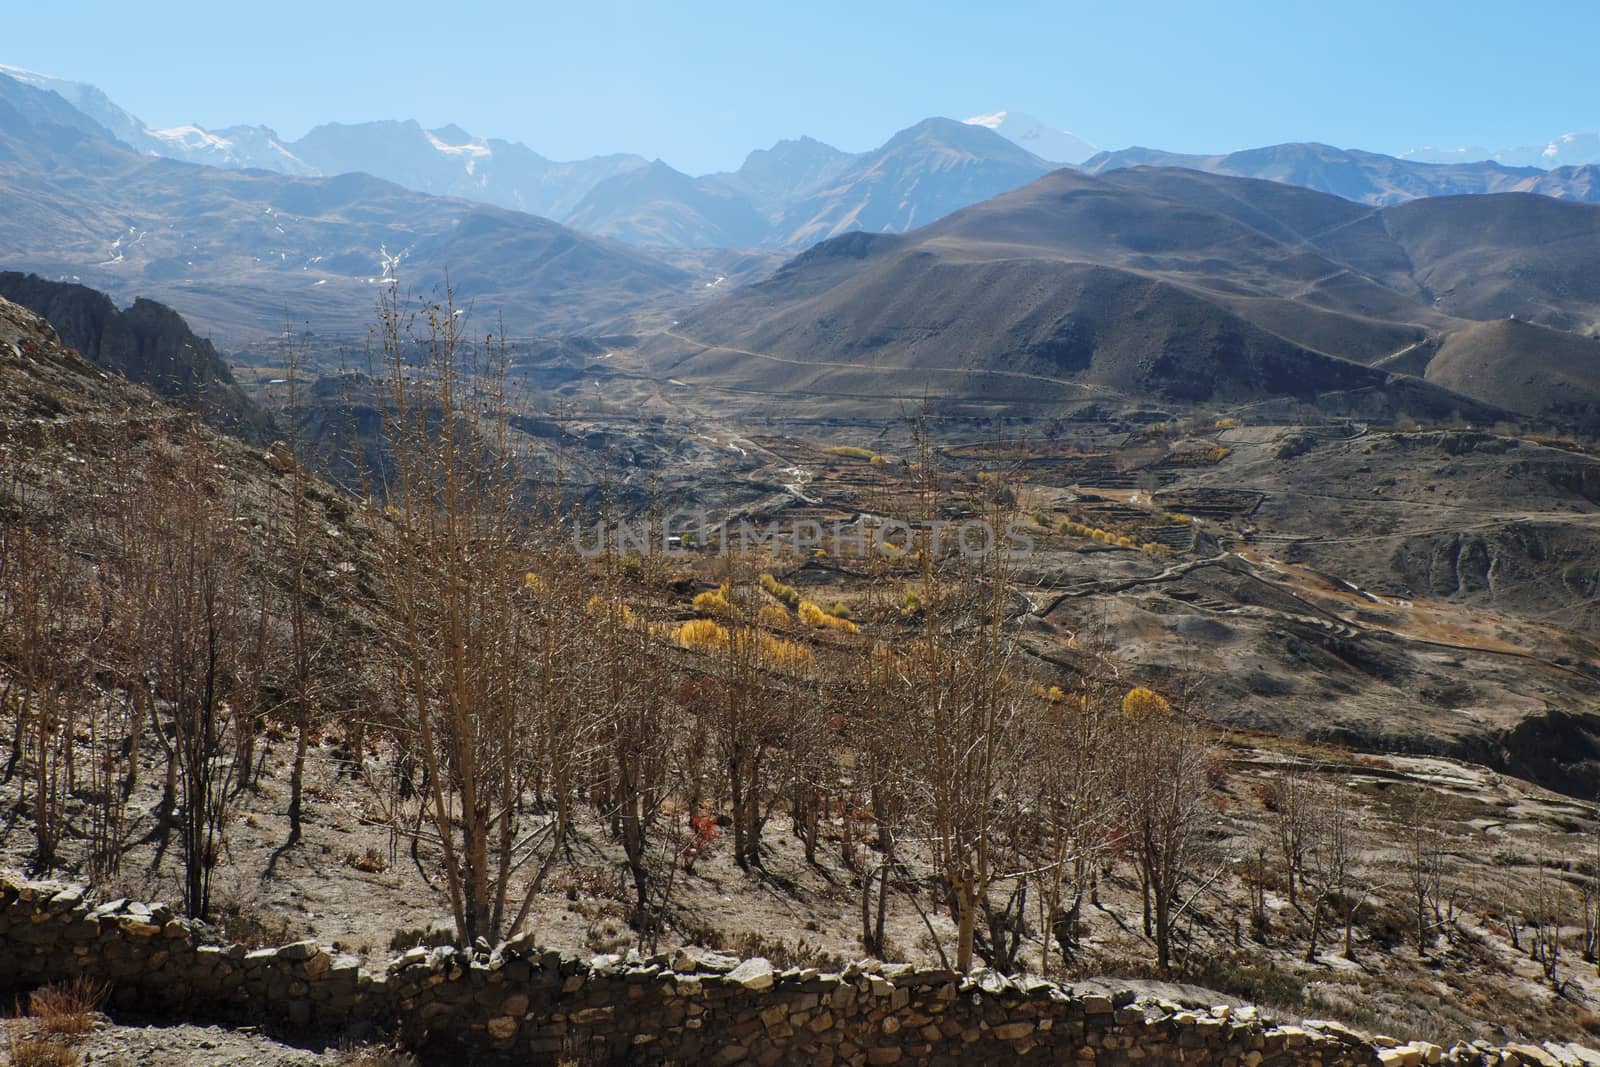 Mountain valley in autumn with yellowed trees at an altitude of 4000 meters near the Muktinath